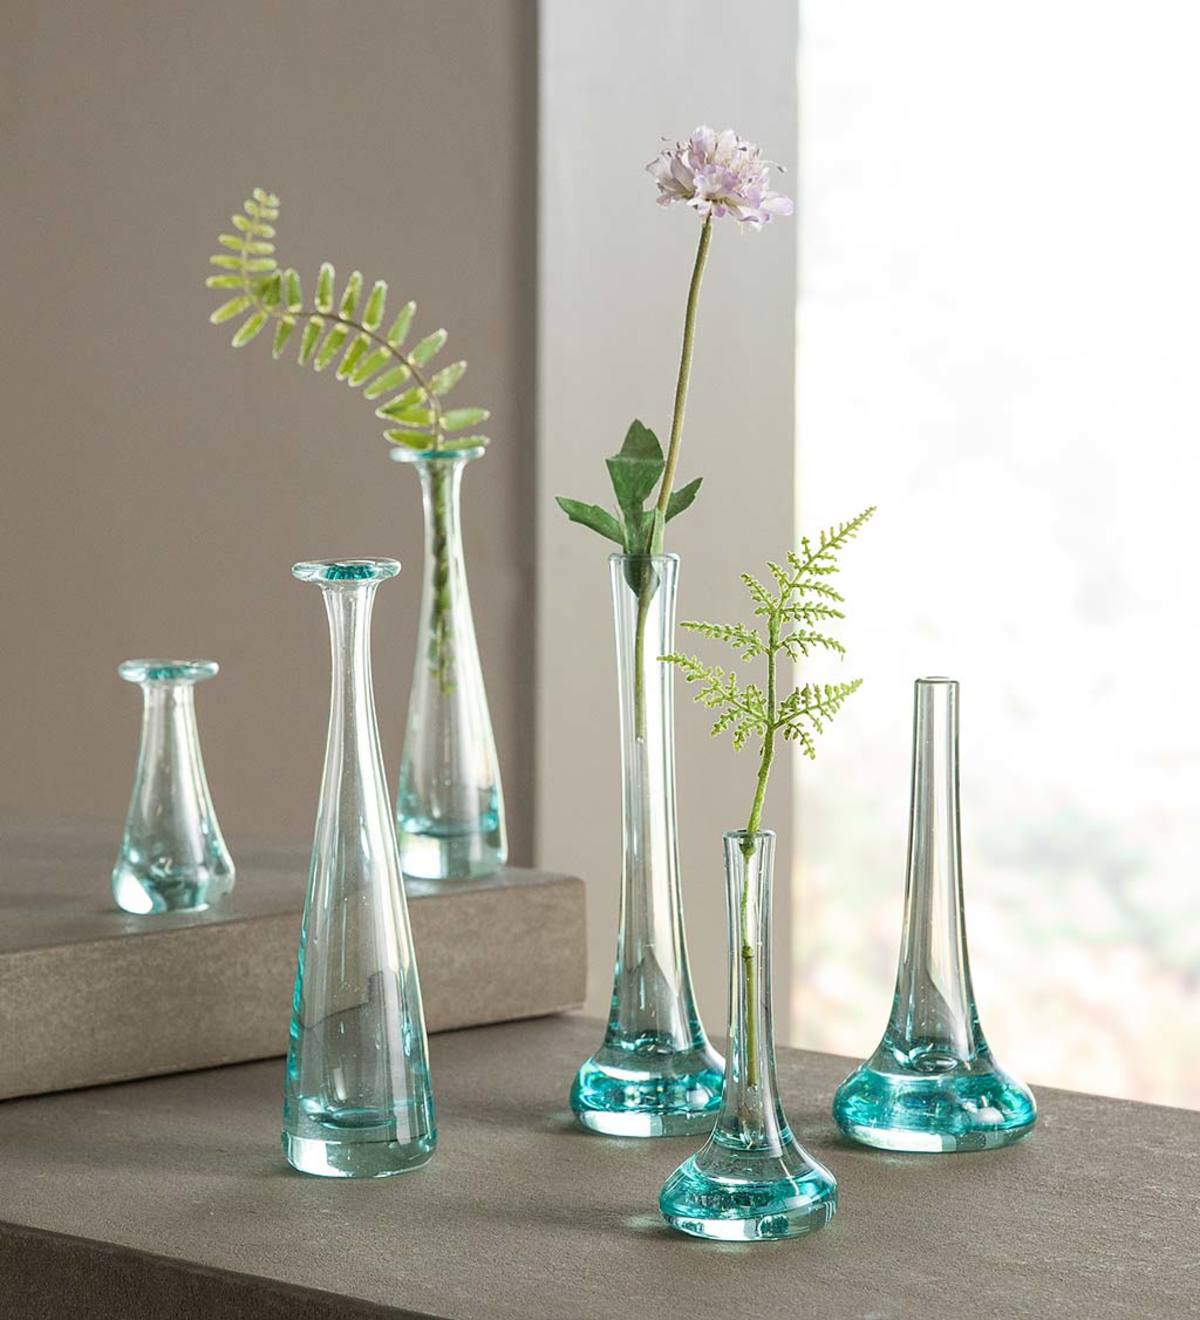 Set of 3 Recycled Glass Bud Vases - Pooled Bottoms